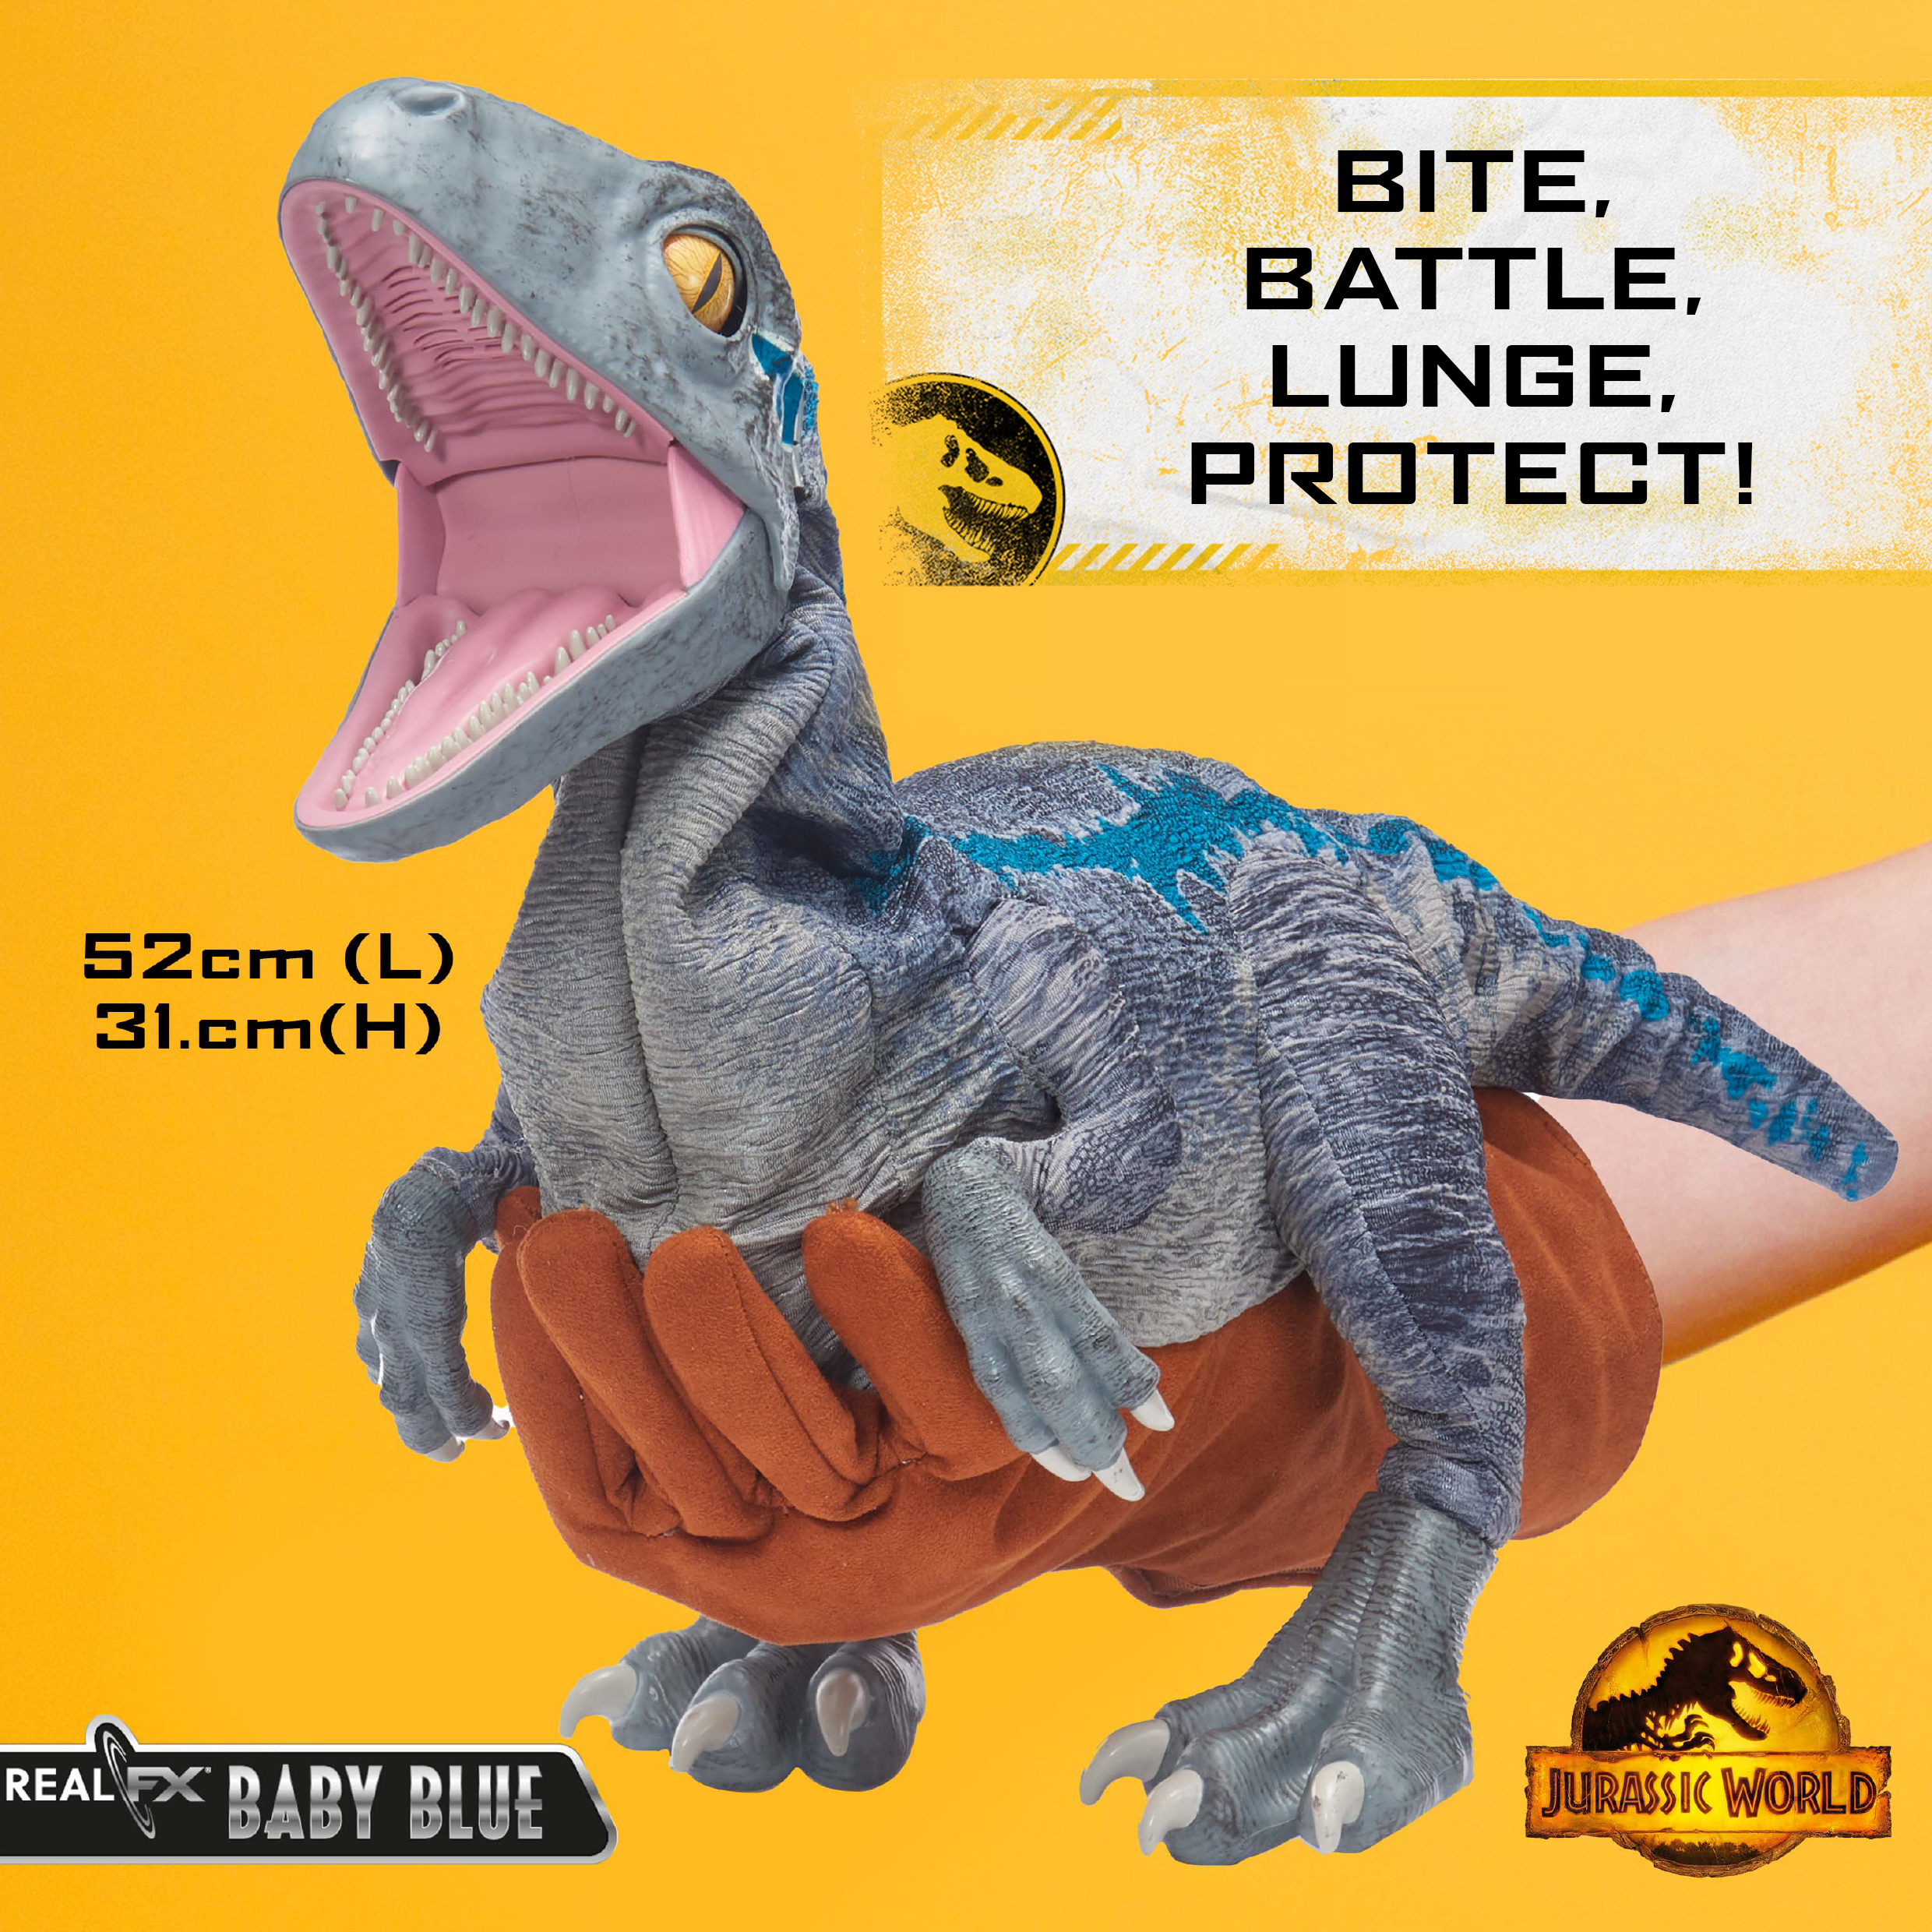 Jurassic World REALFX Baby Blue | Hyper-Realistic Dinosaur Animatronic Puppet Toy | Life-like Movements and Real Movie Sounds | Jurassic World Dominion Official Gifts, Collectables and Toys - image 3 of 13